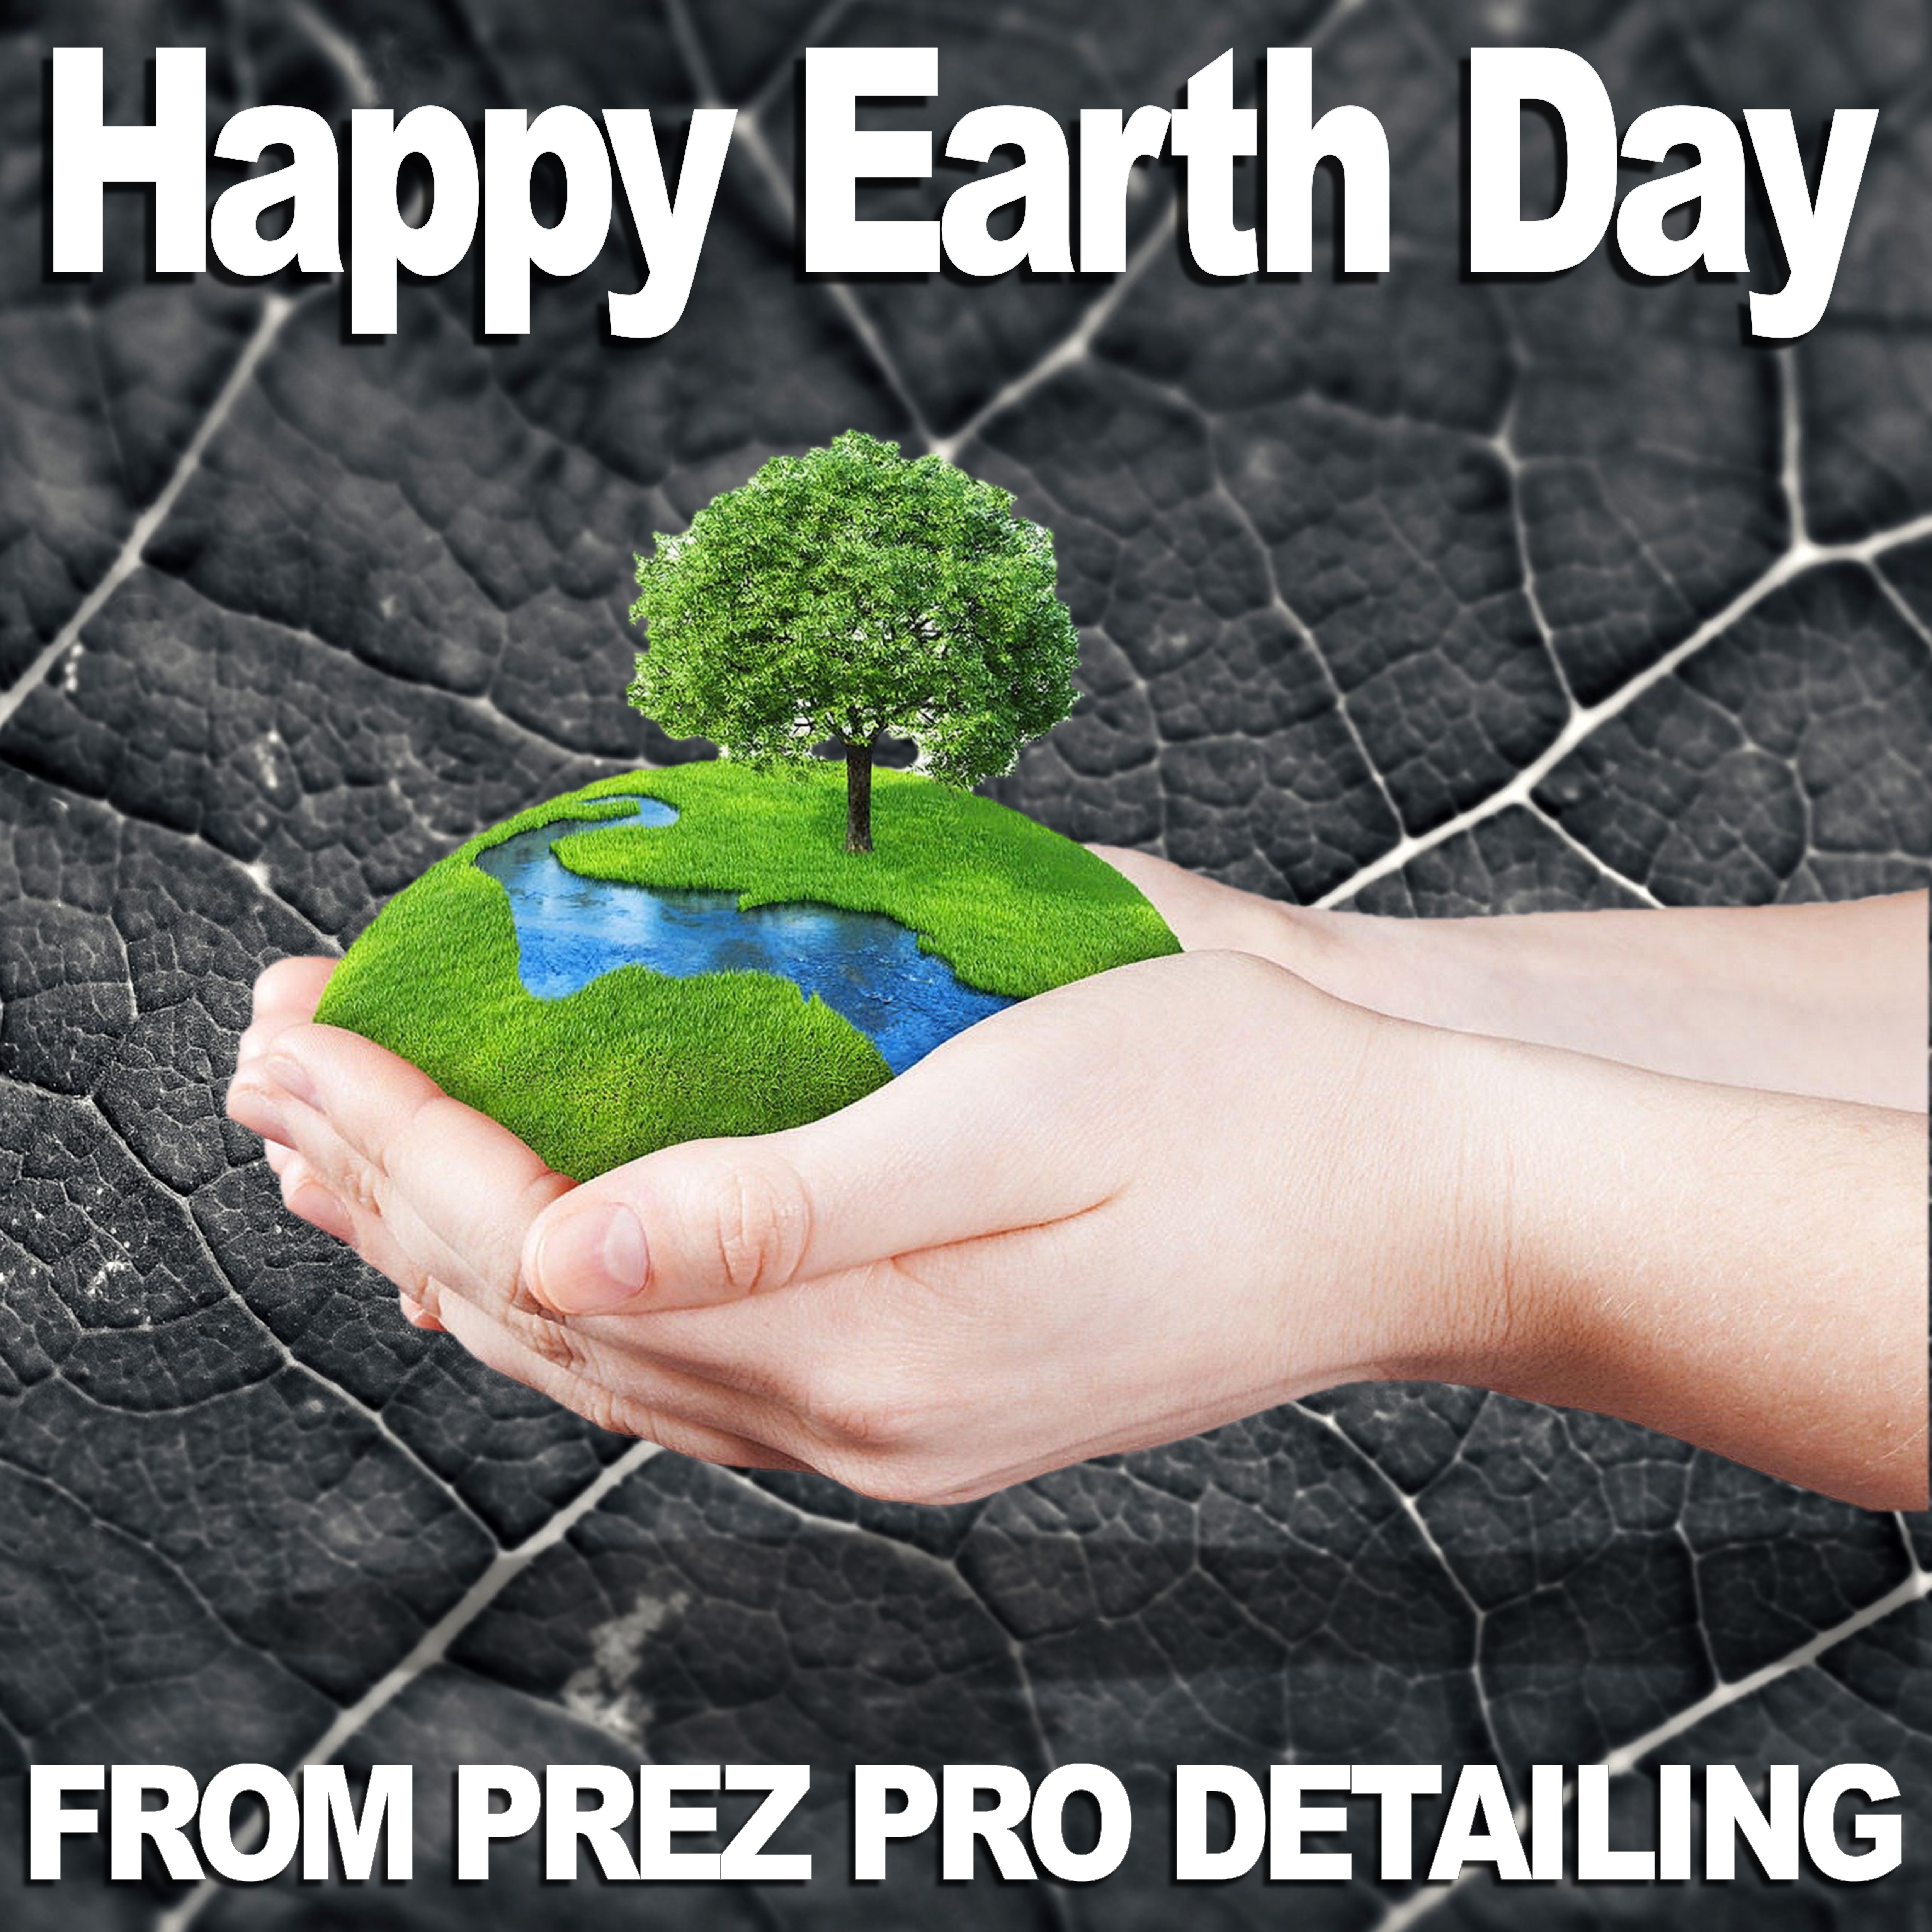 2021.04.05 - Digital Content - PPD - Earth Day